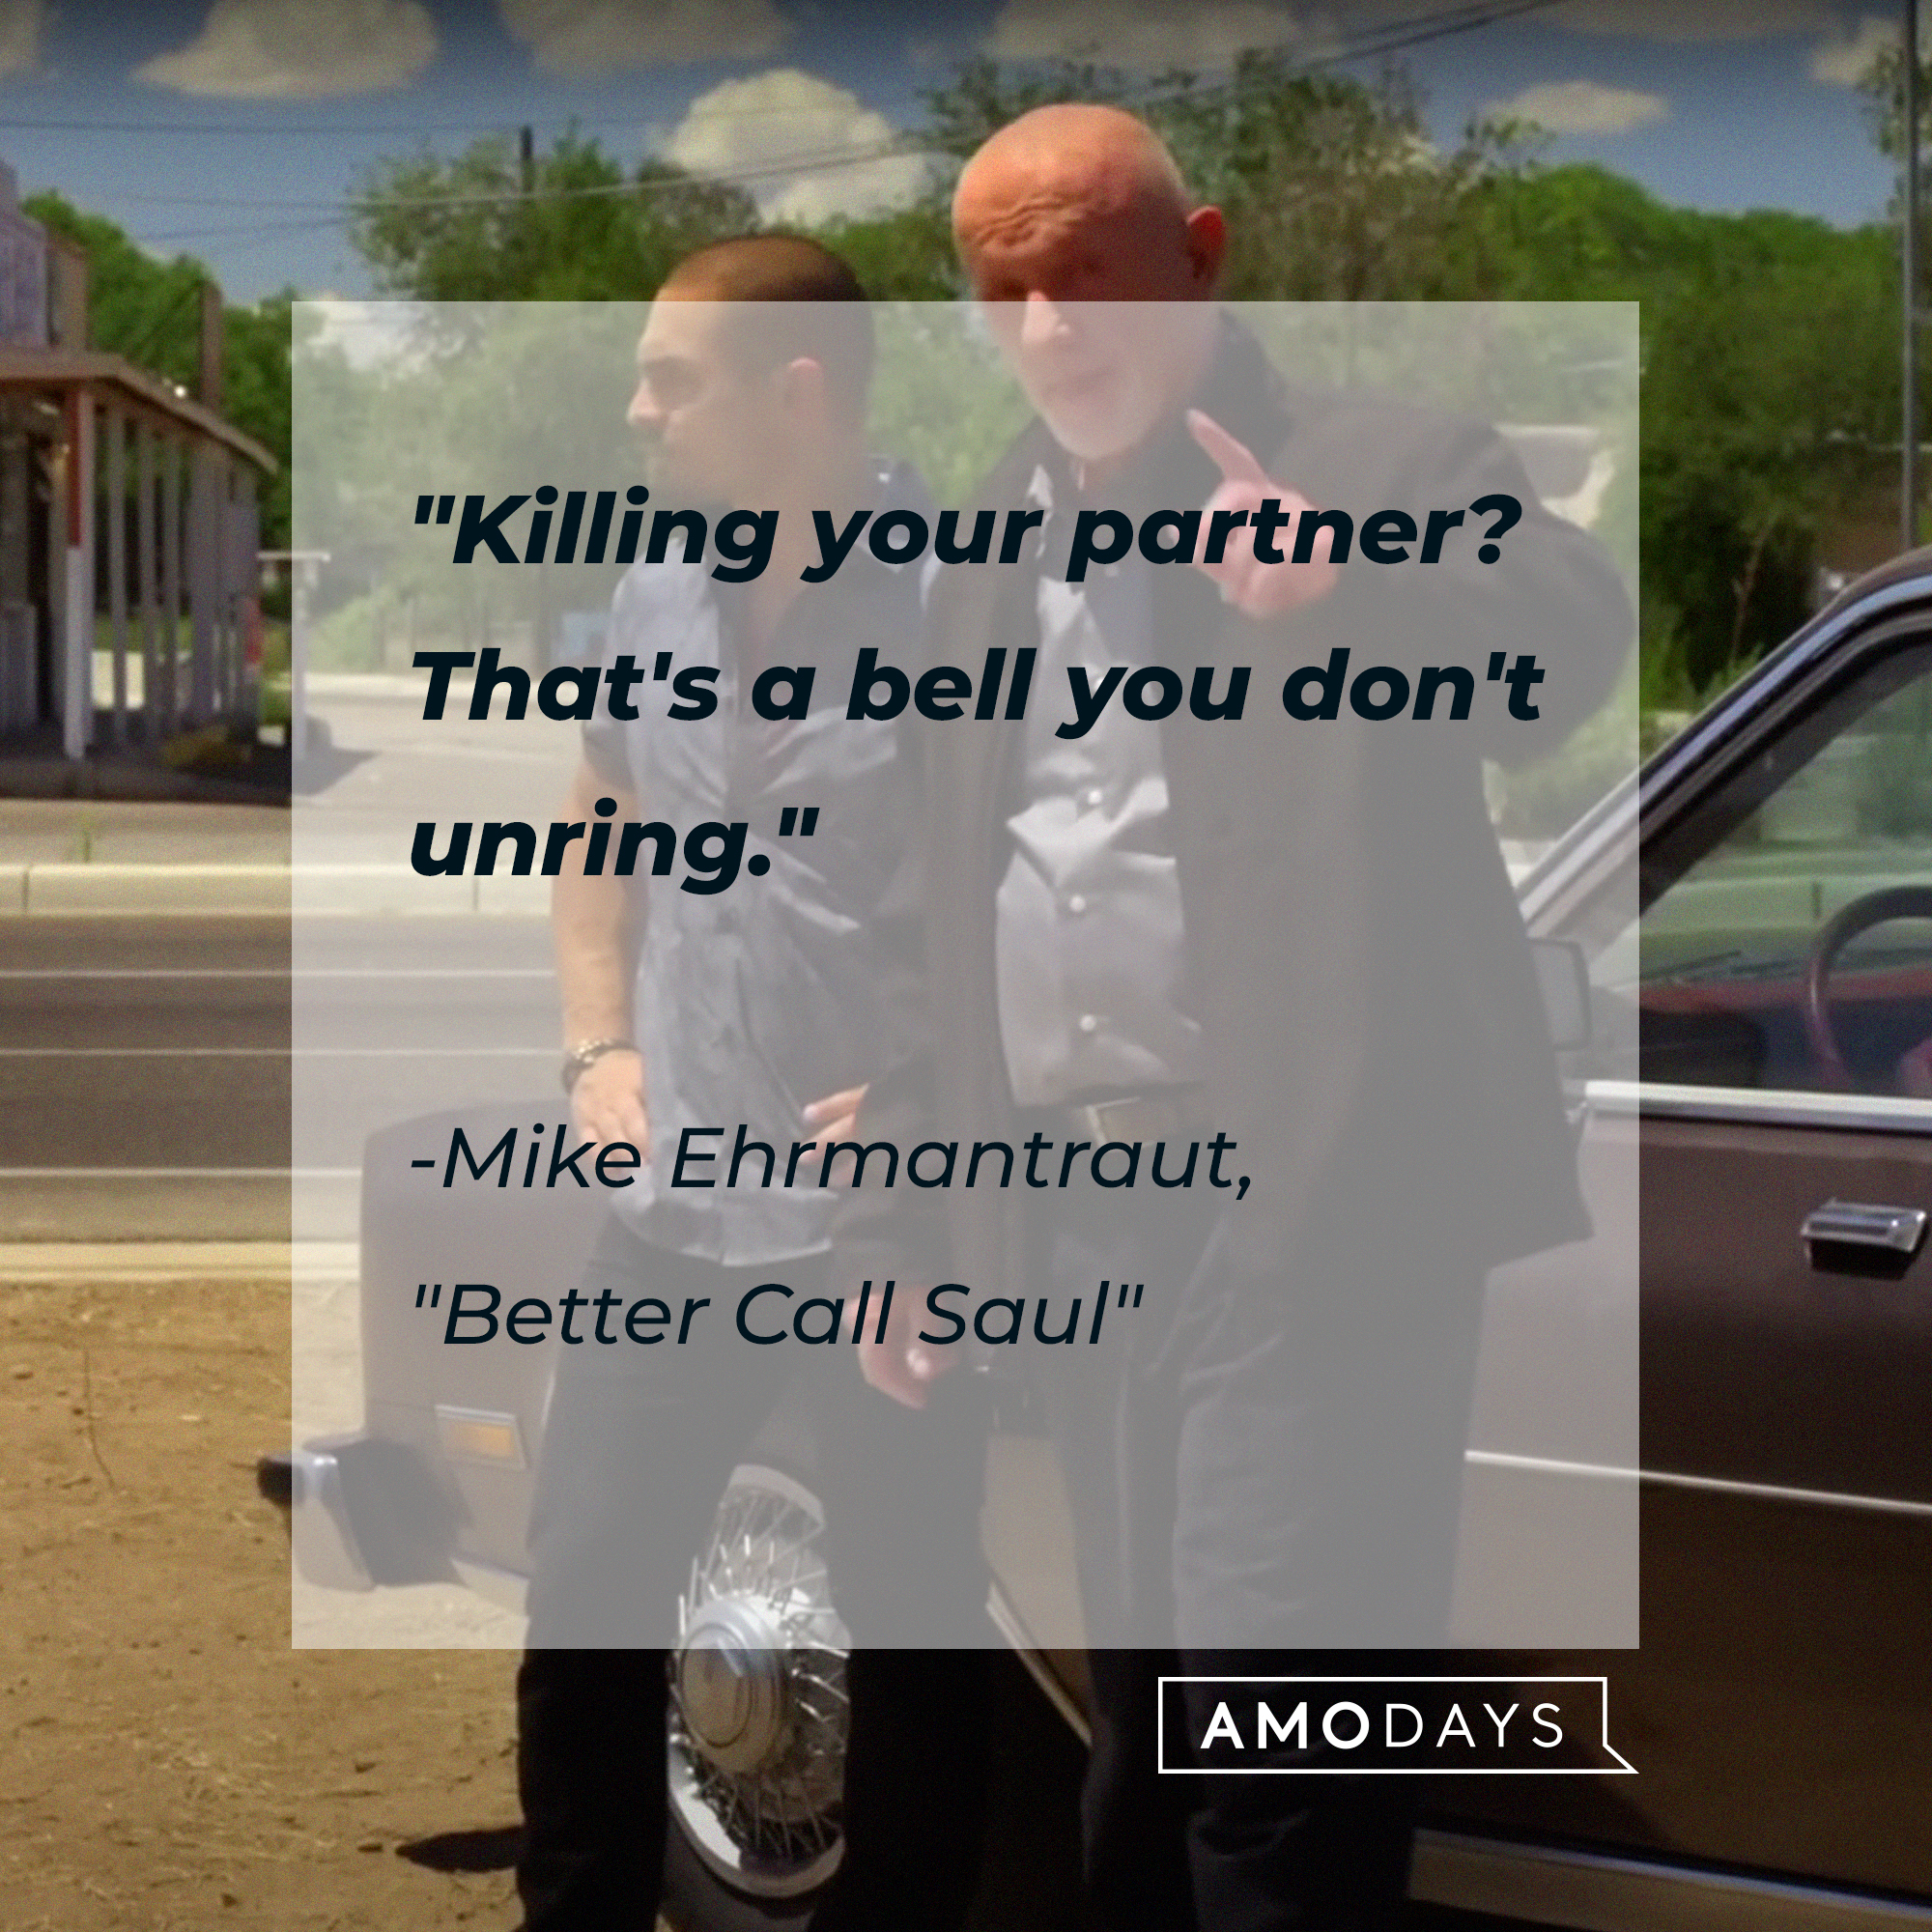 Mike Ehrmantraut with his quote, "Killing your partner? That's a bell you don't unring." | Source: youtube.com/breakingbad